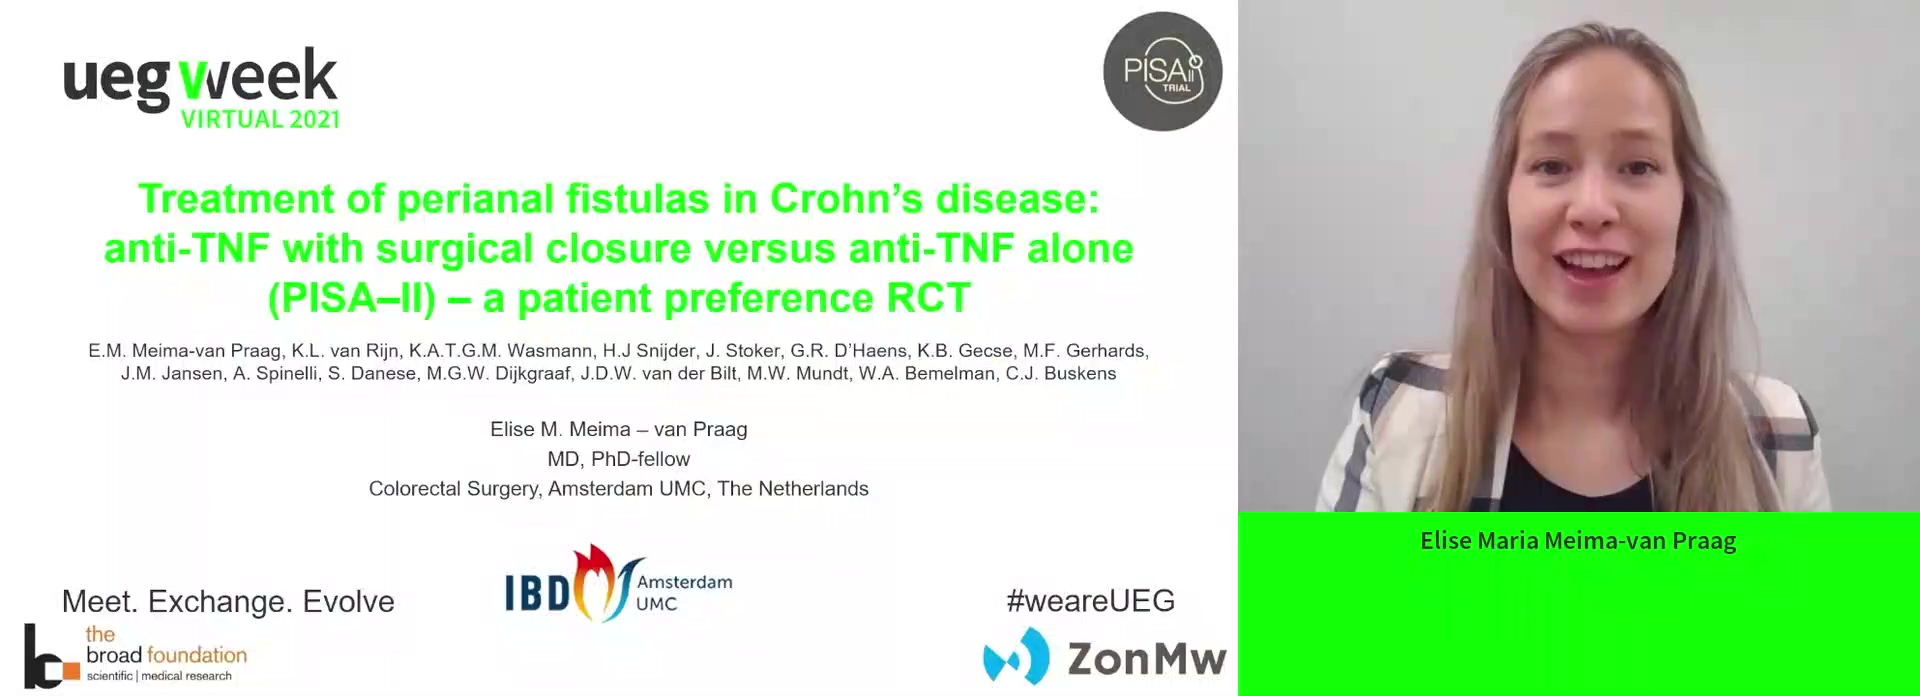 TREATMENT OF PERIANAL FISTULAS IN CROHN’S DISEASE: ANTI-TNF WITH SURGICAL CLOSURE VERSUS ANTI-TNF ALONE (PISA-II) - A PATIENT PREFERENCE RCT